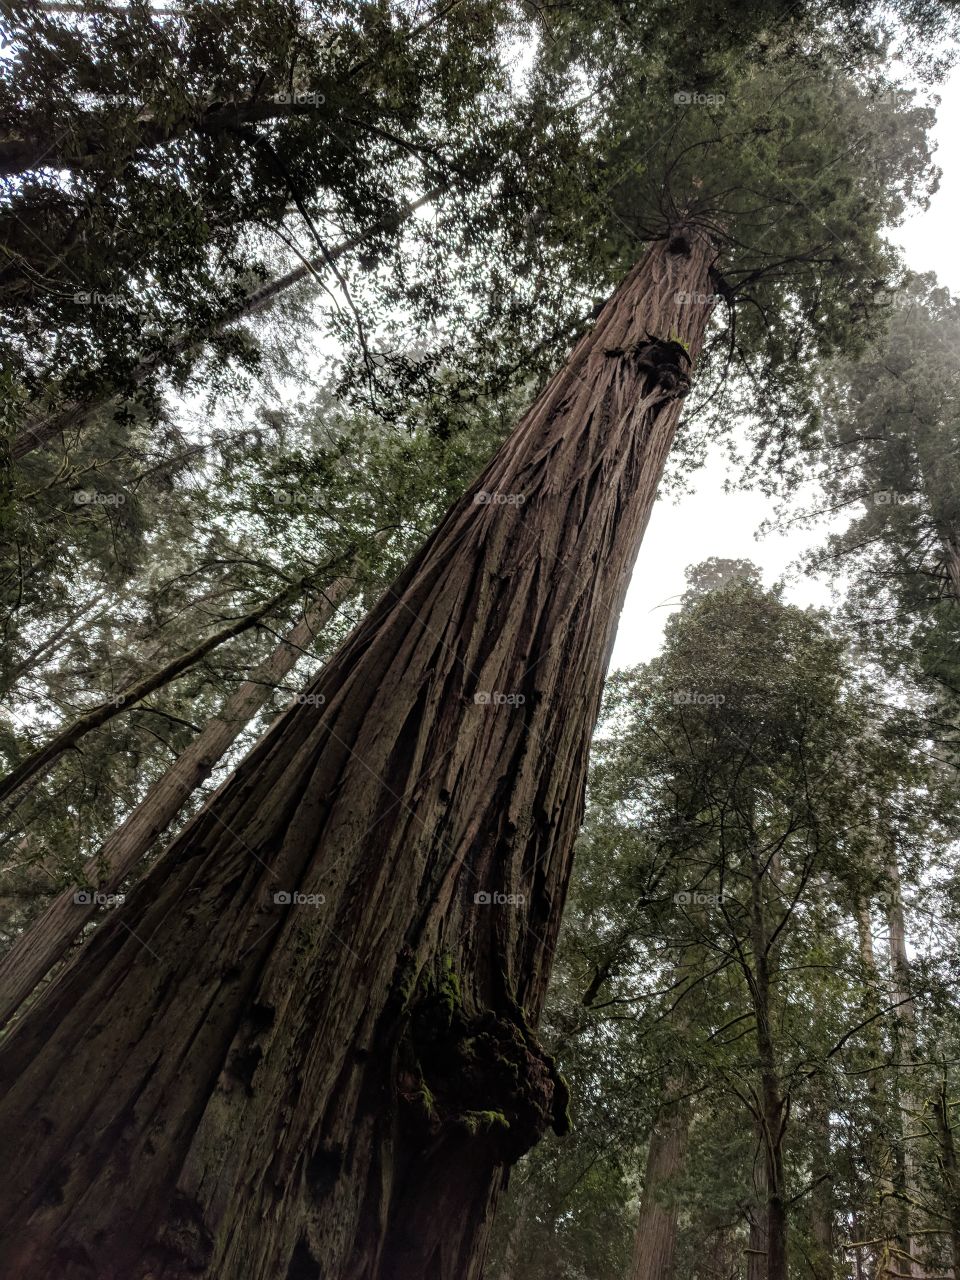 The National Redwood Forest along the coast of California, the trees are truly amazing.